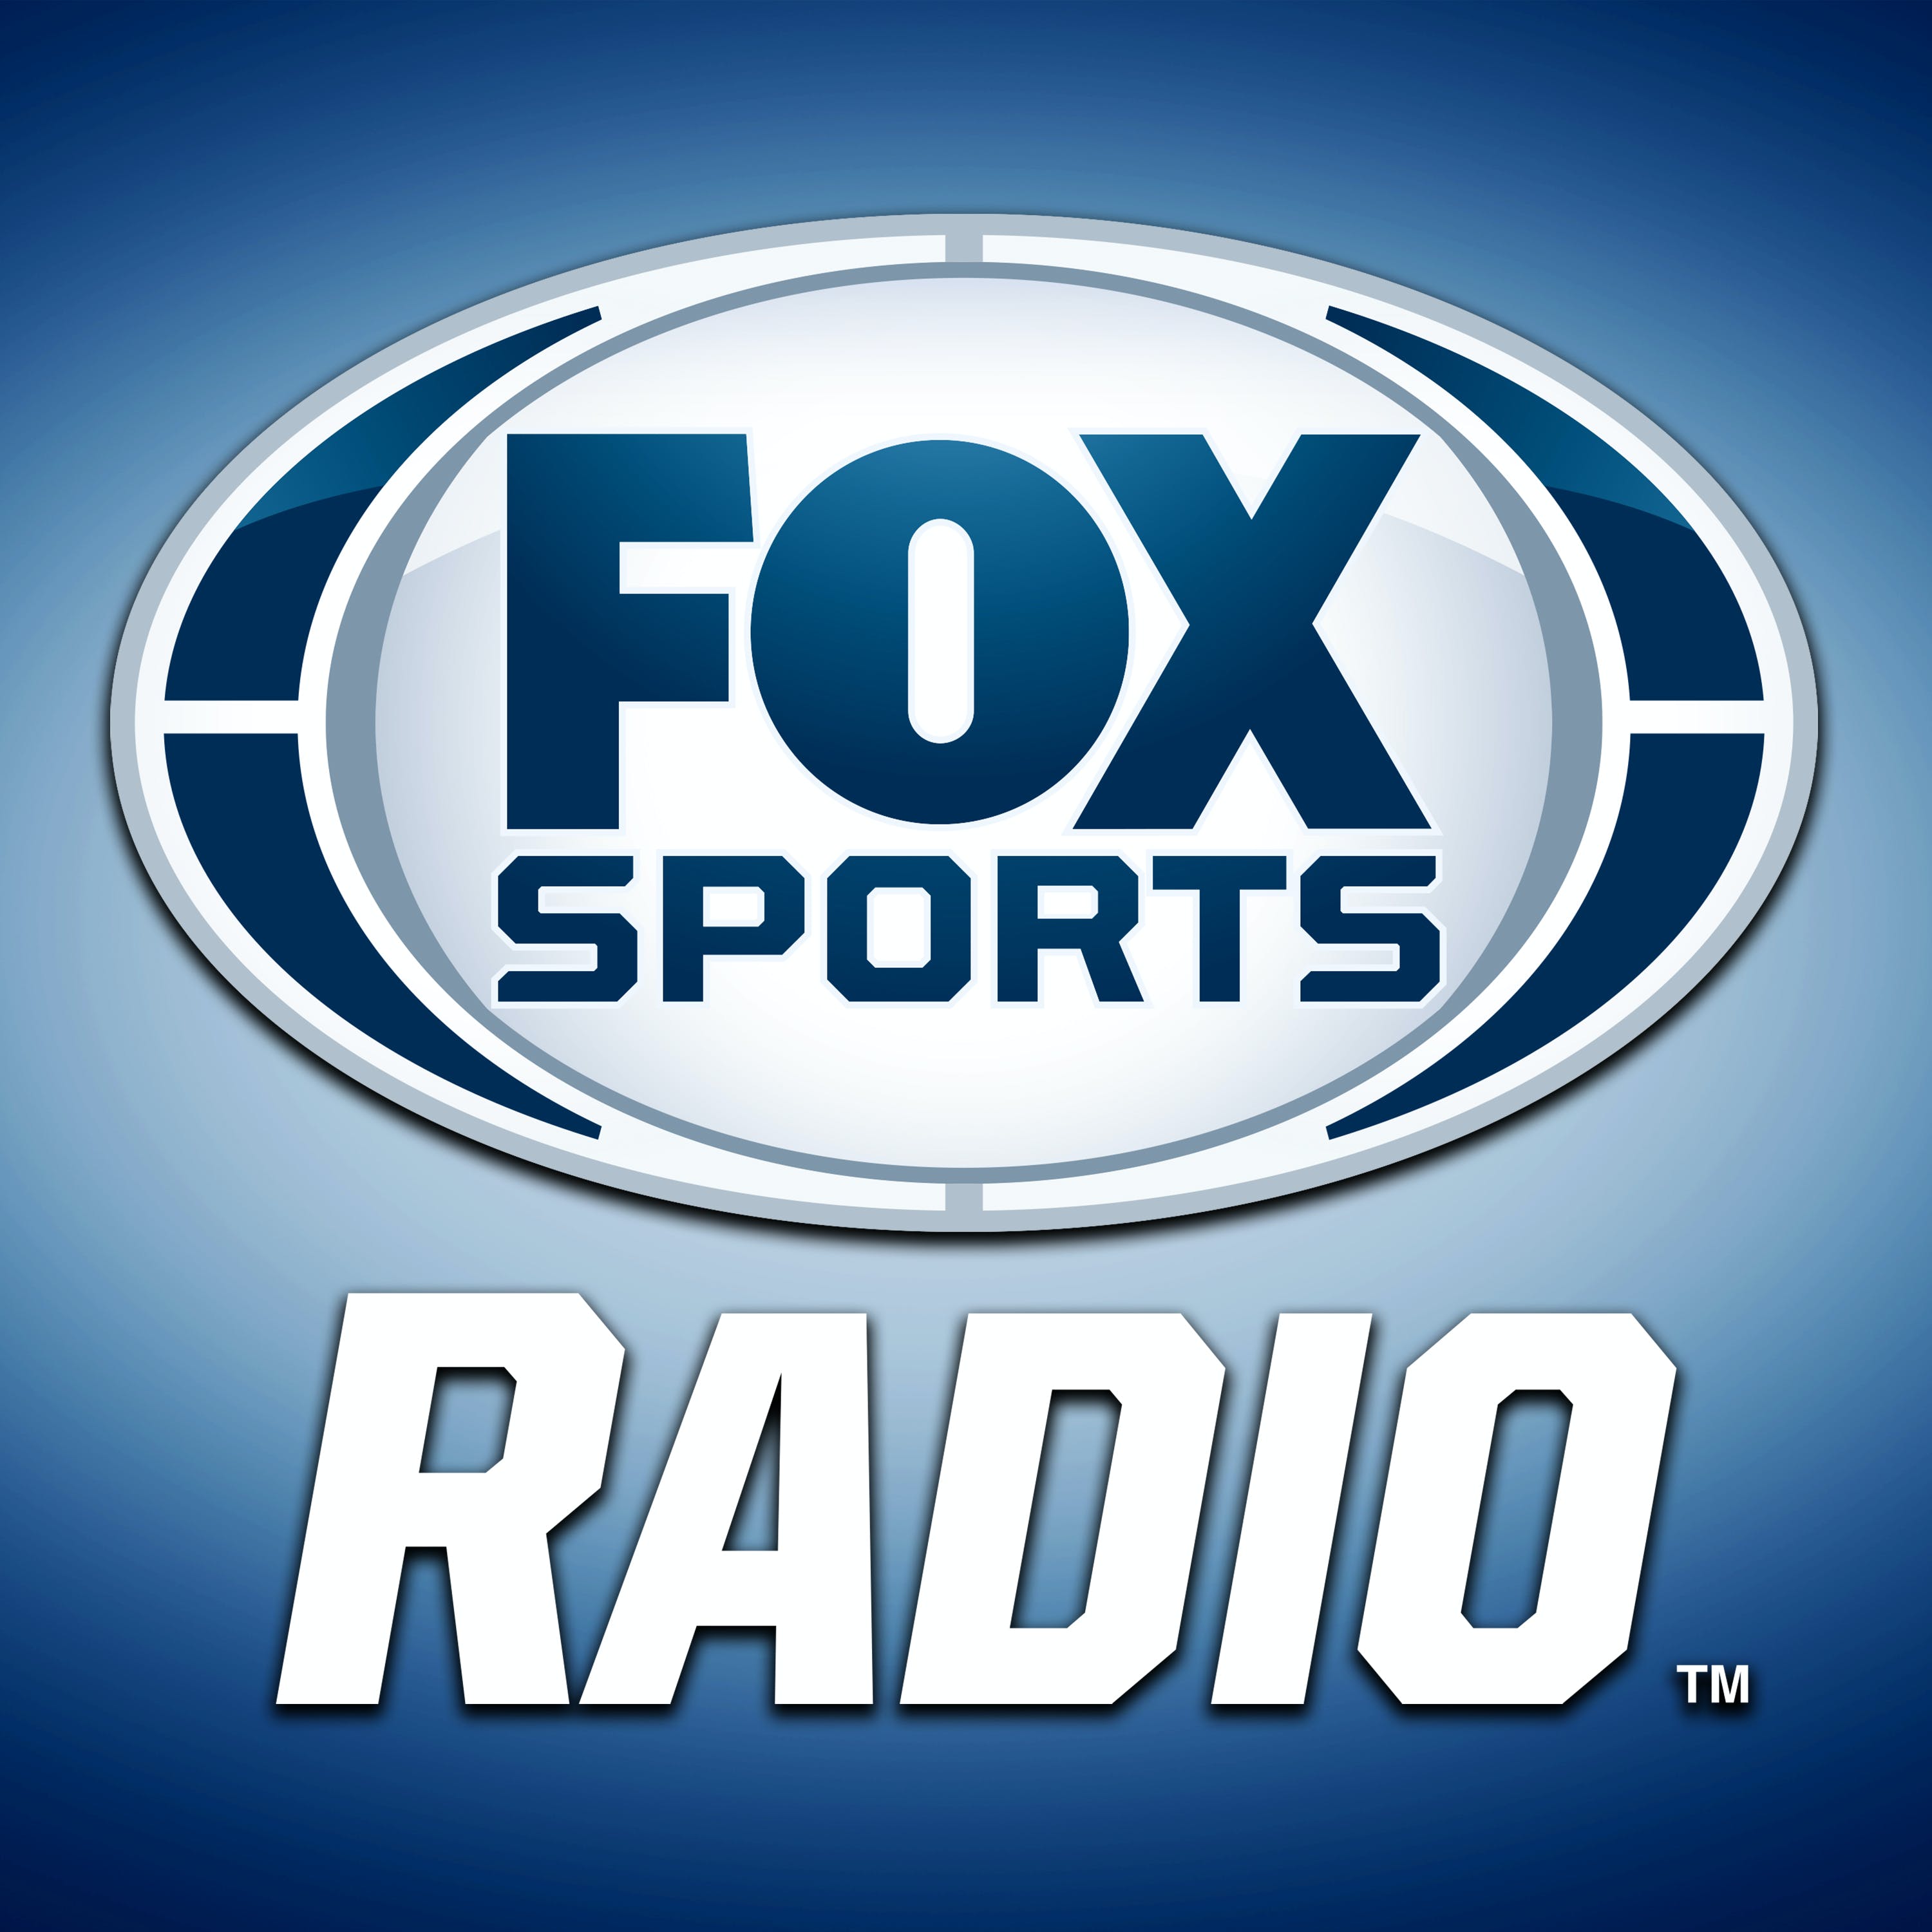 01/02/2021 - FOX Football Saturday with Arnie Spanier and Aaron Torres